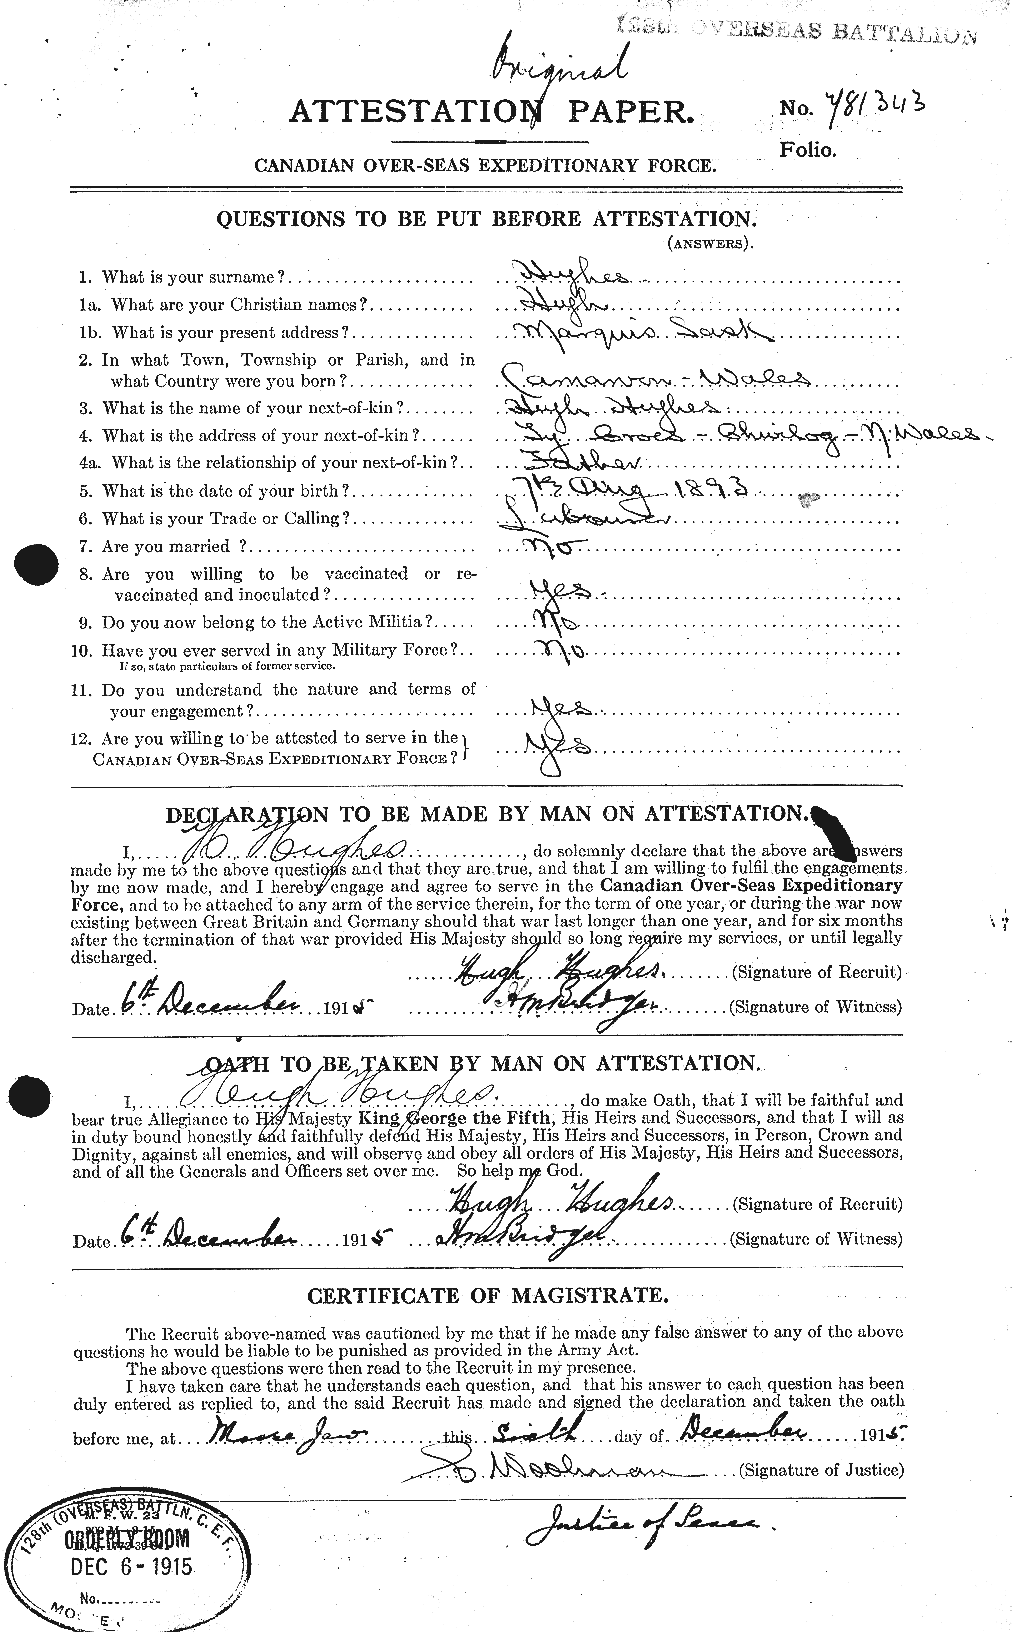 Personnel Records of the First World War - CEF 403917a